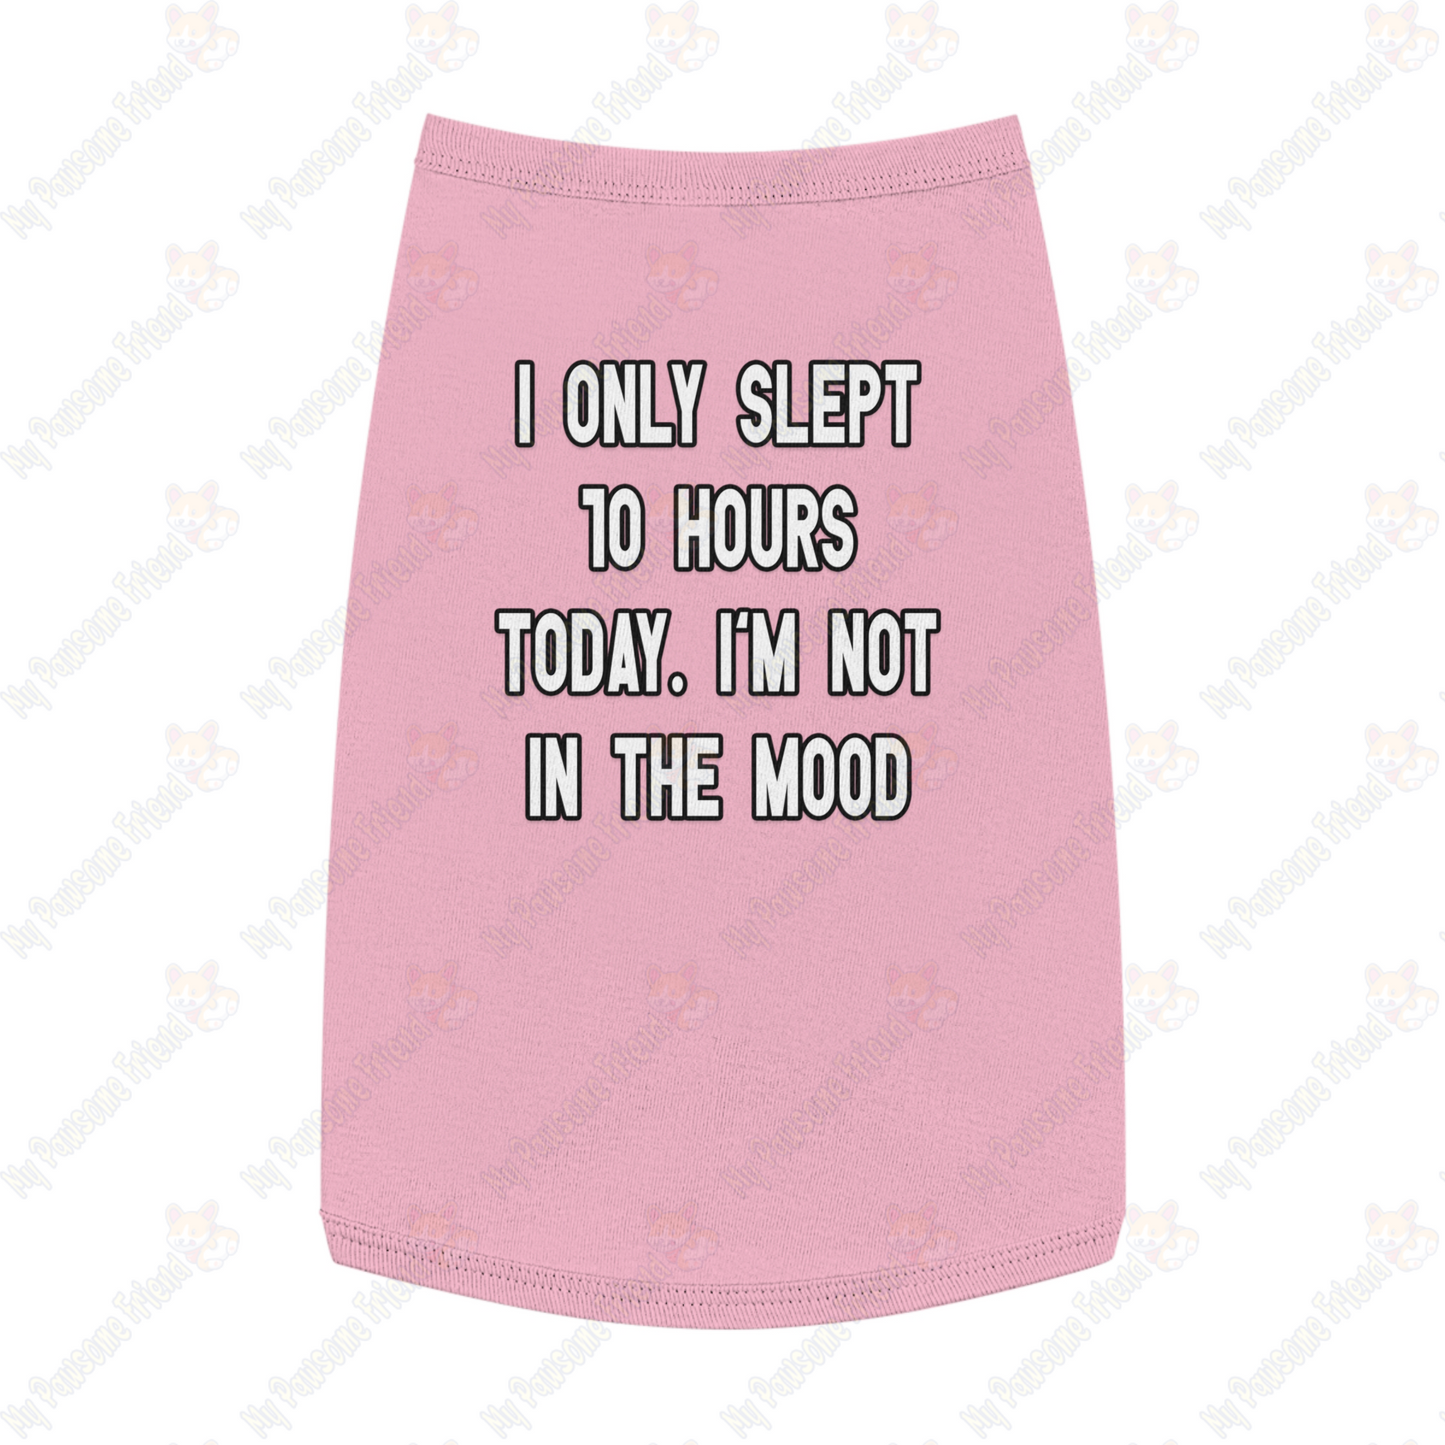 I ONLY SLEPT 10 HOURS TODAY. I'M NOT IN THE MOOD Pet Tank Top pink